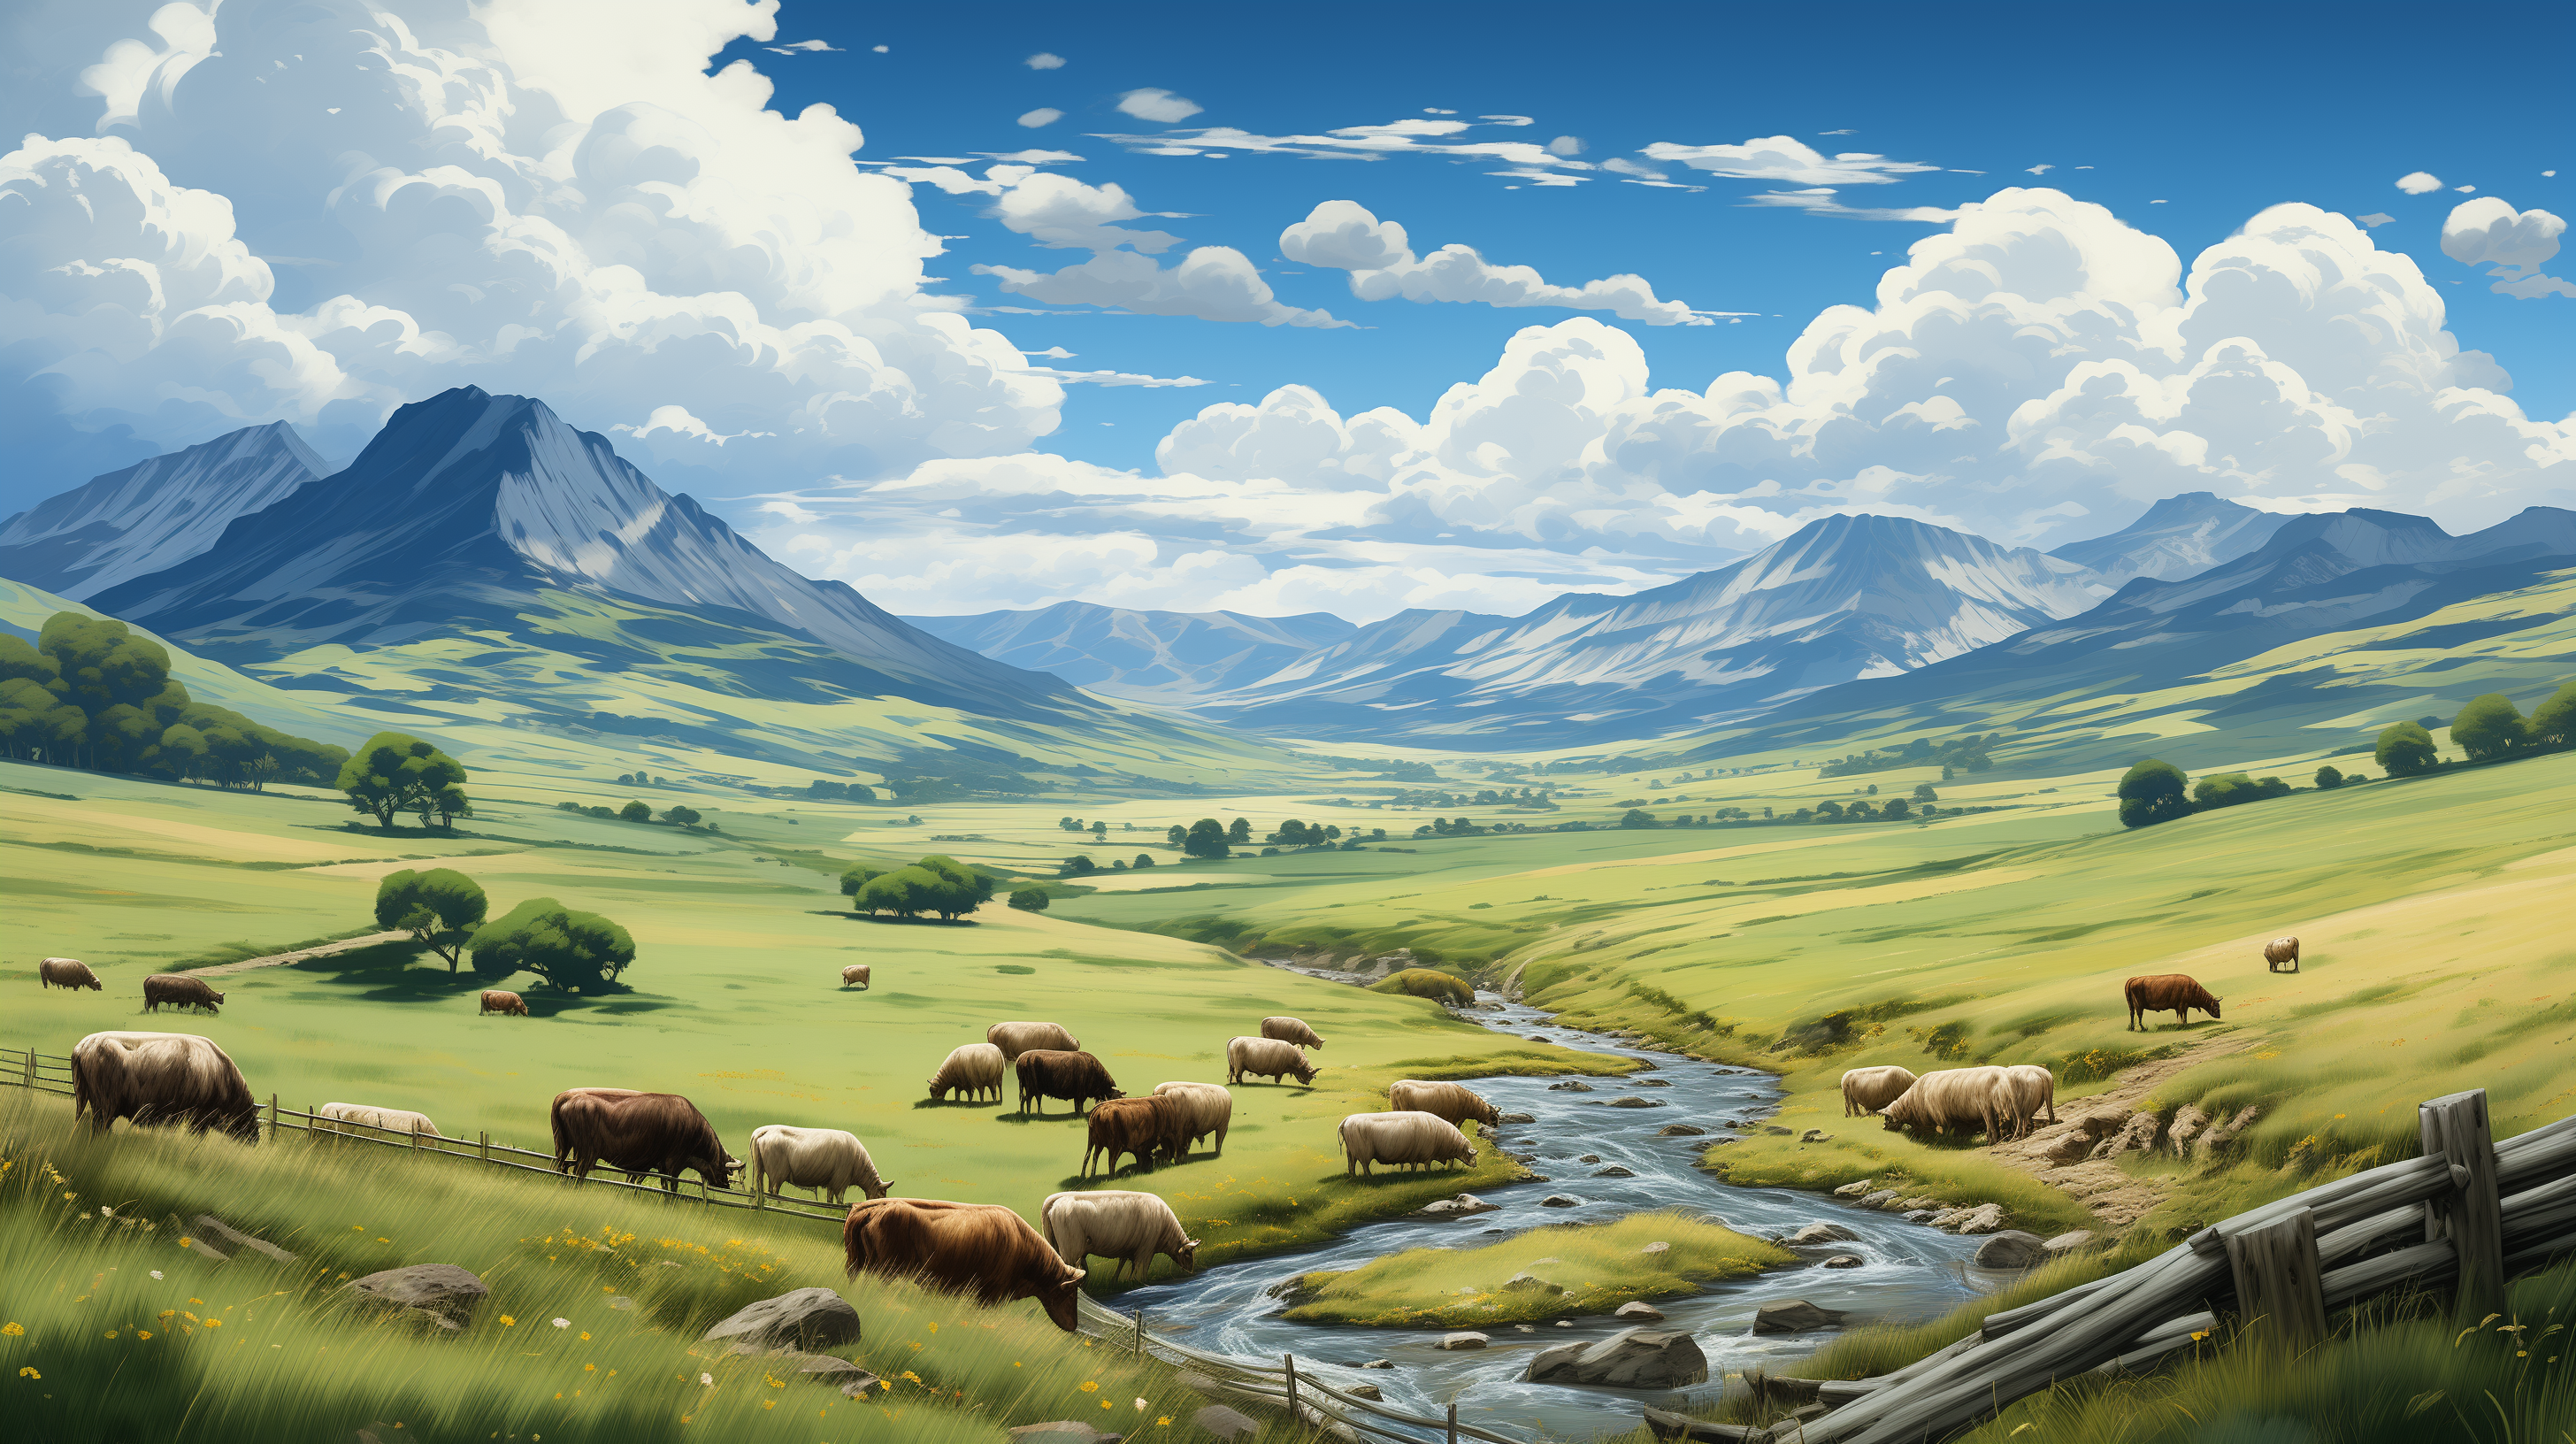 HD desktop wallpaper featuring a serene countryside landscape with cows grazing by a meandering stream and mountains in the background.